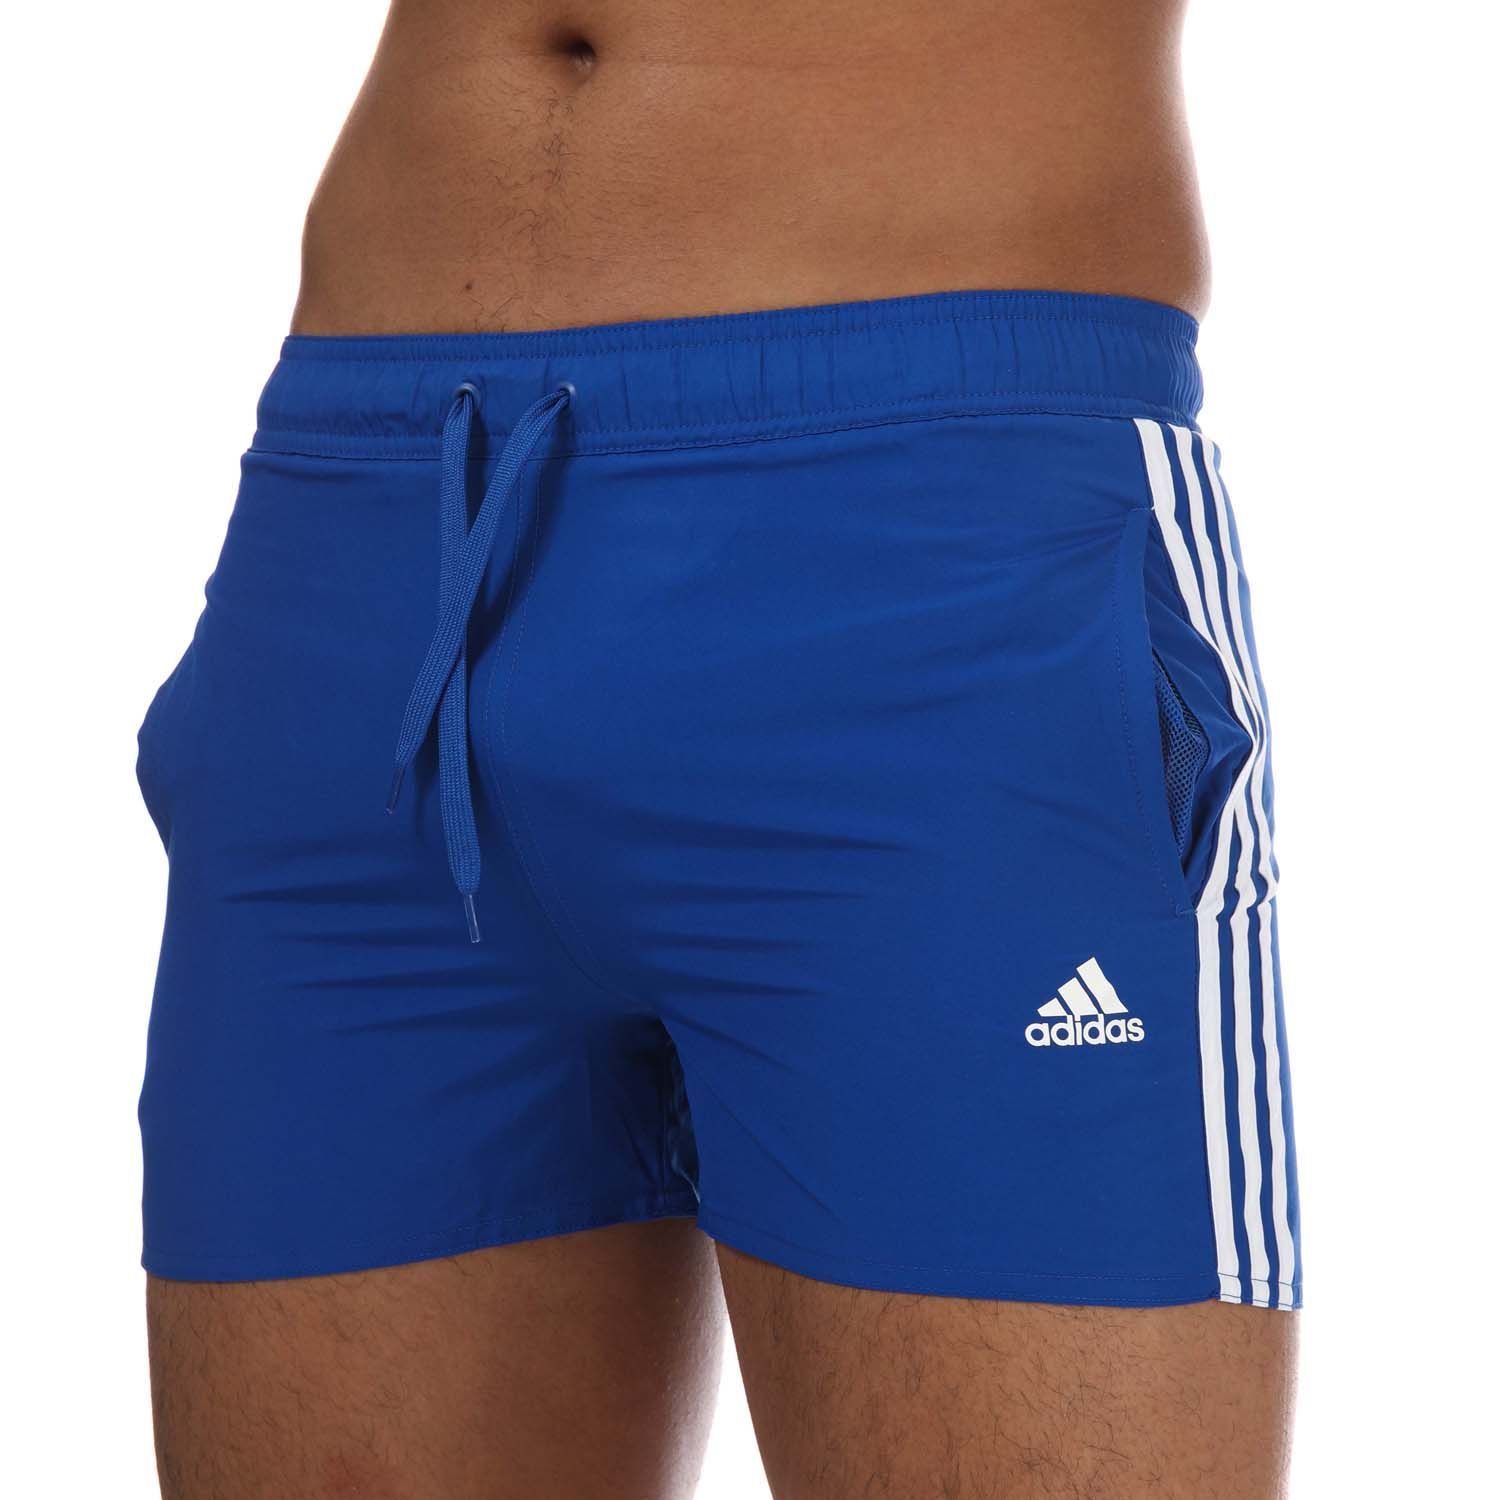 Mens adidas 3-Stripes CLX Swim Shorts in royal blue.- Drawcord on elastic waist.- Side pockets.- Mesh inner briefs.- Quick-drying.- 3-Stripes to sides.- Main Material: 100% Polyester (Recycled). Inner Brief: 100% Polyester (Recycled). - Ref: FJ3365